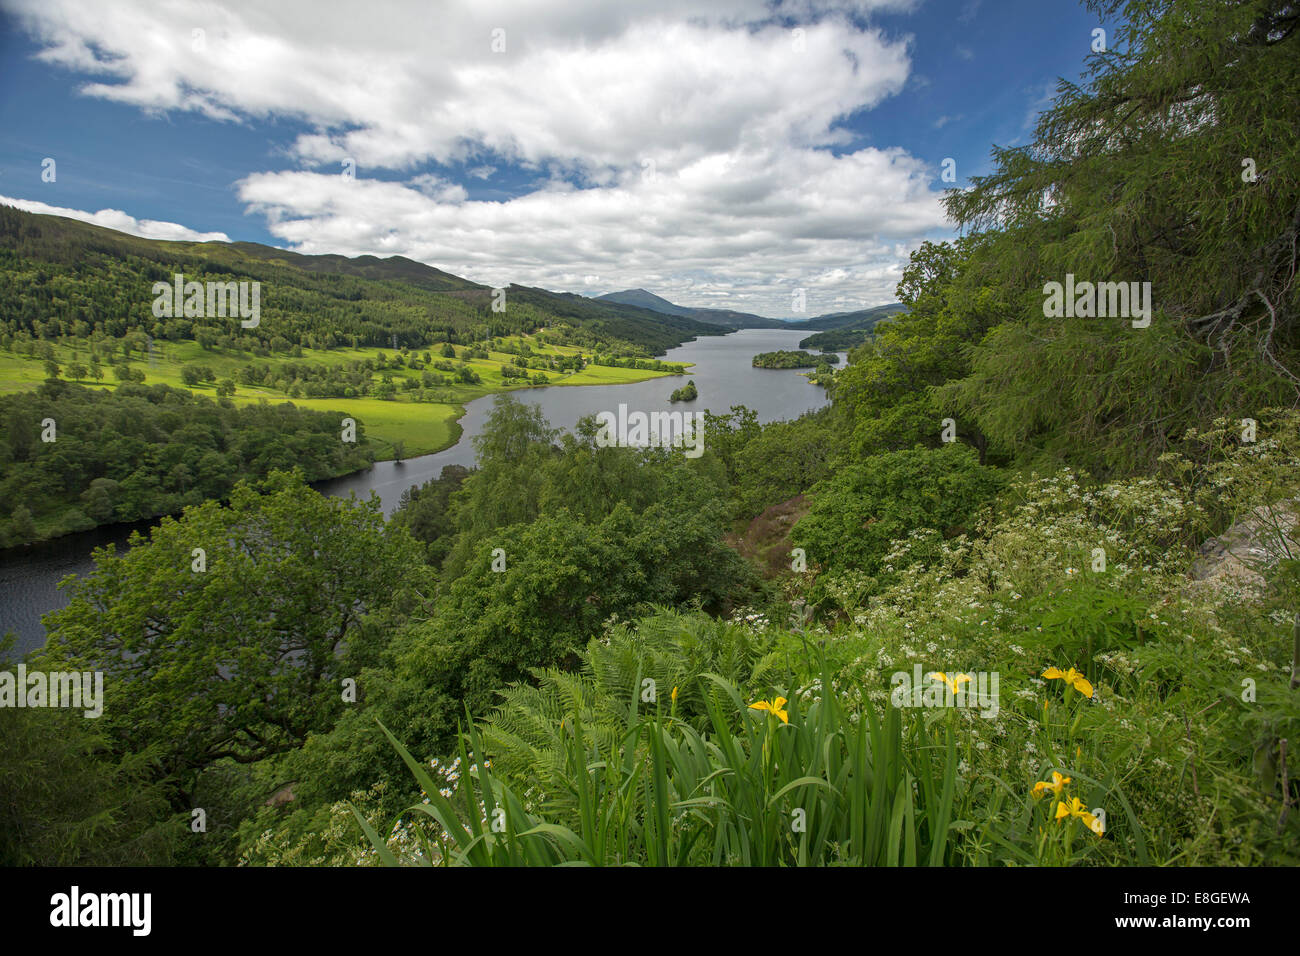 Stunning vast landscape of wildflowers, Loch Tummel, woodlands and distant mountains from Queens View lookout Pitlochry Scotland Stock Photo